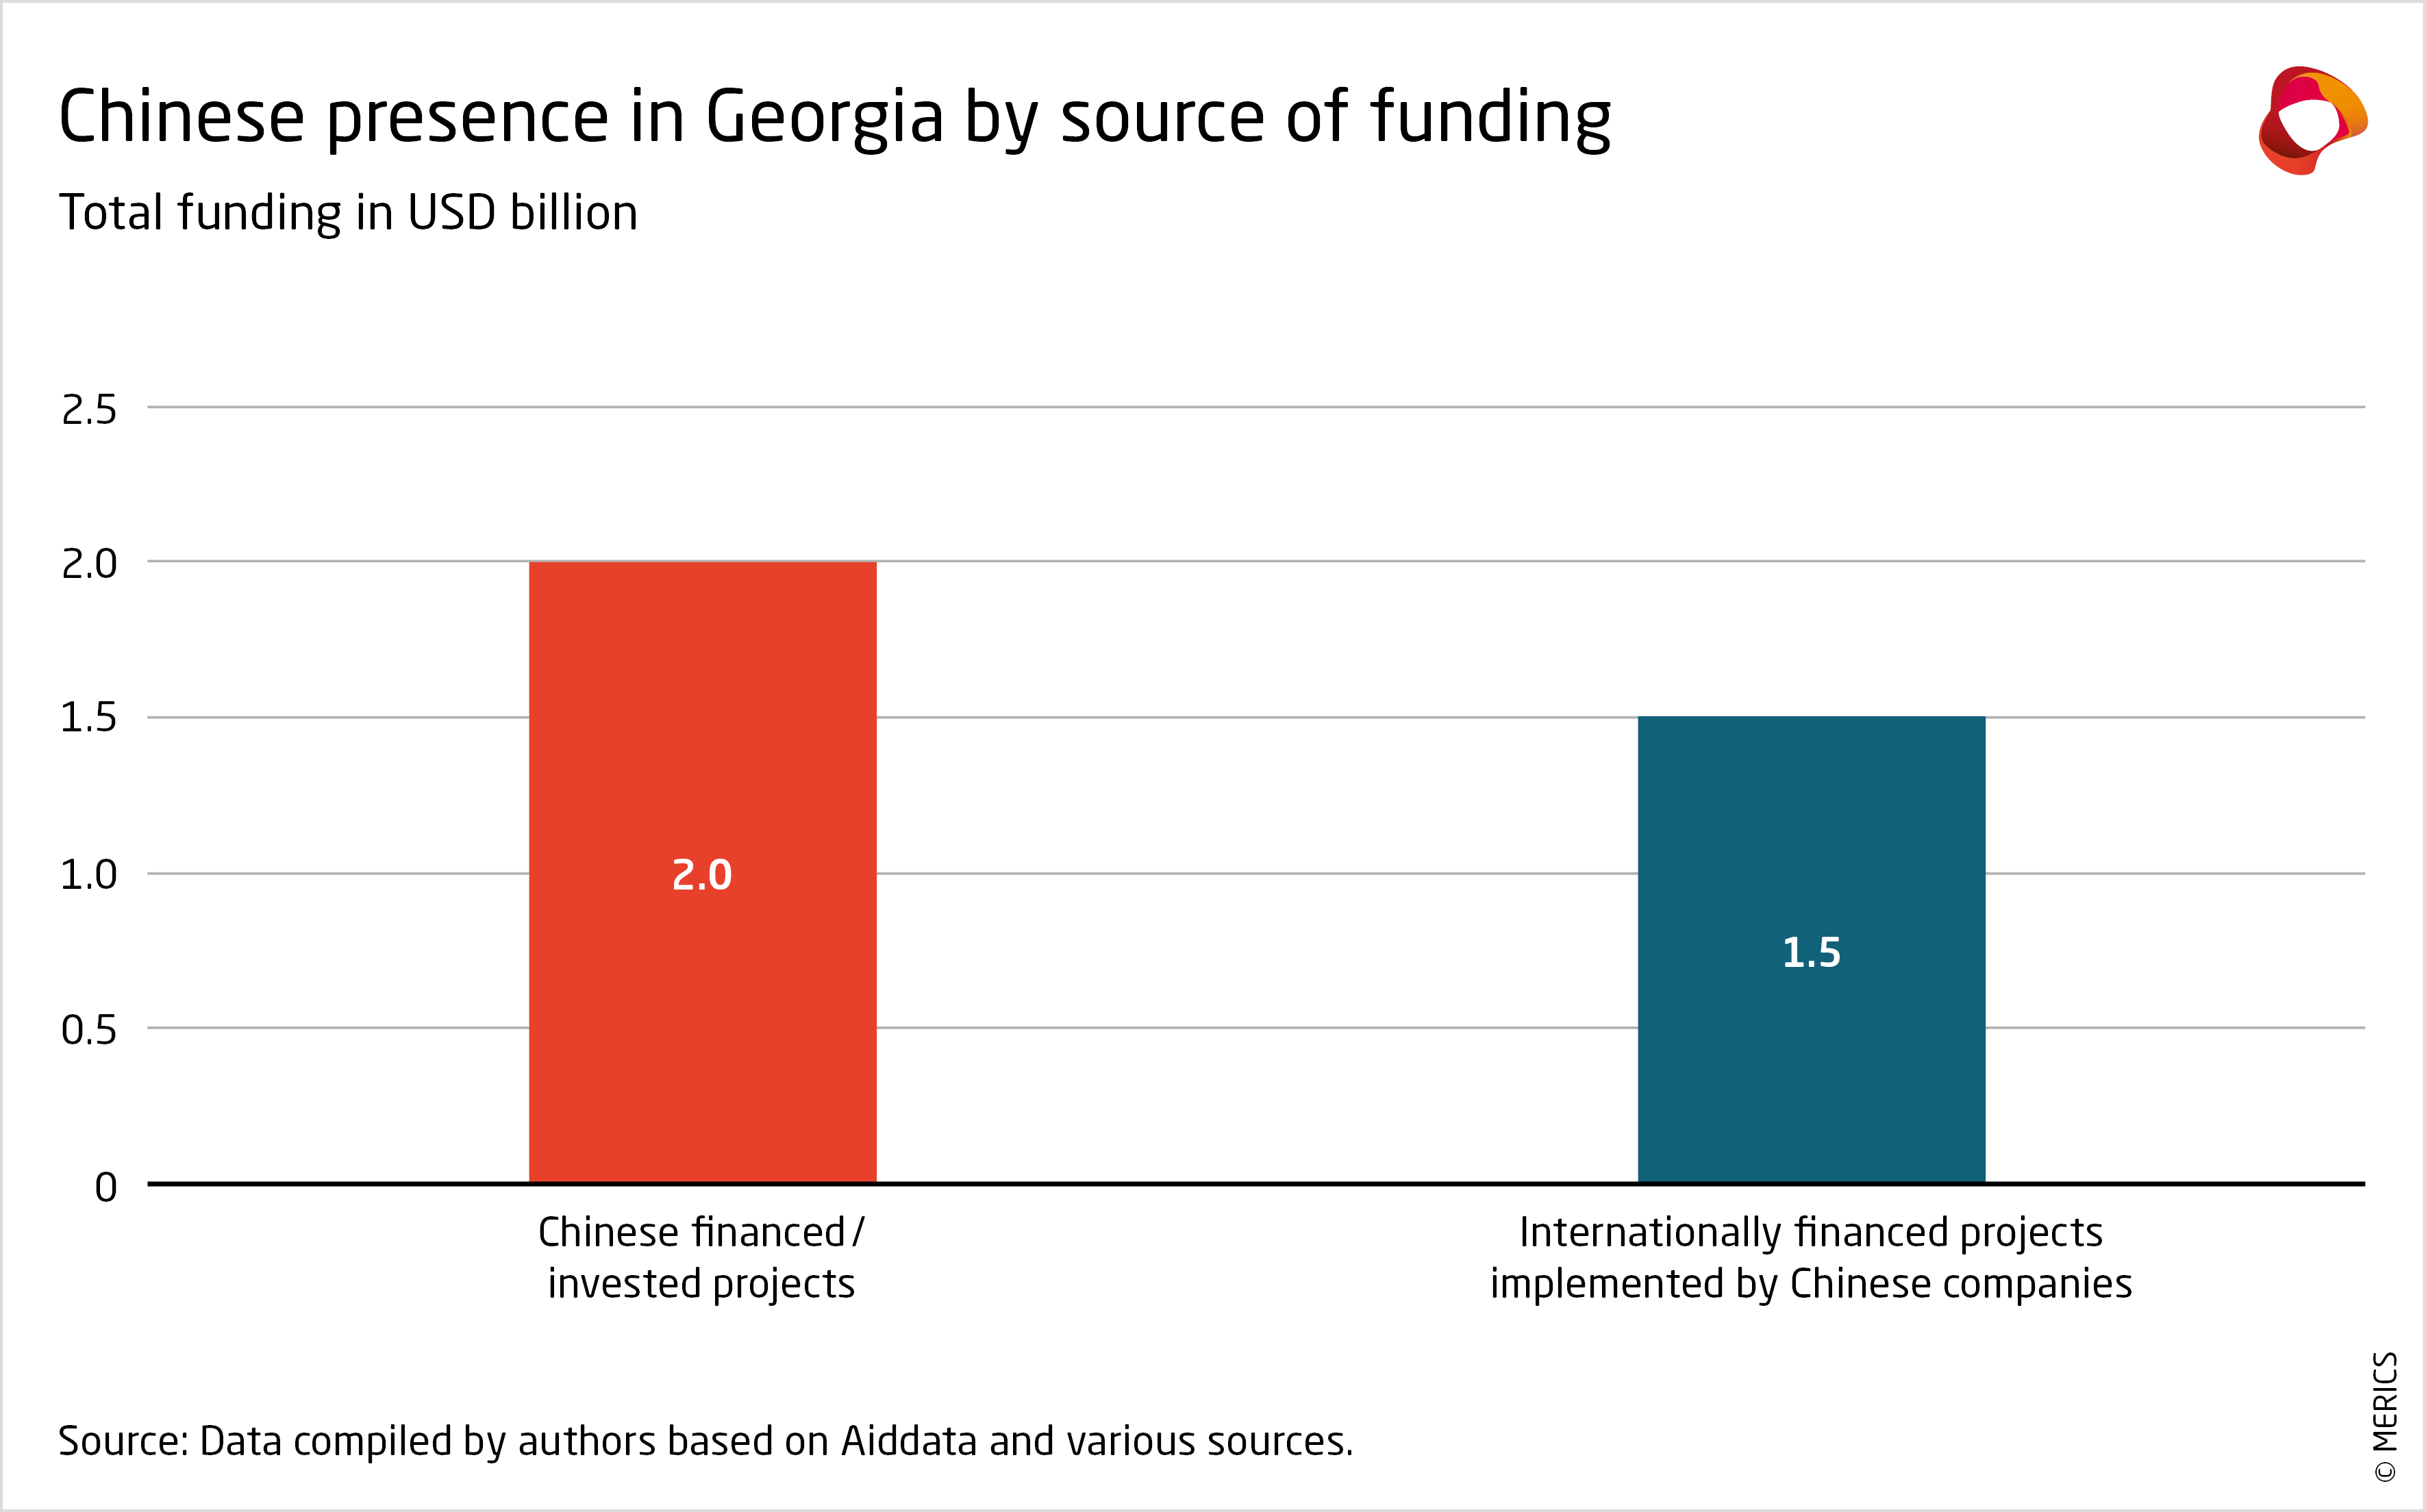 Chinese presence in Georgia by funding